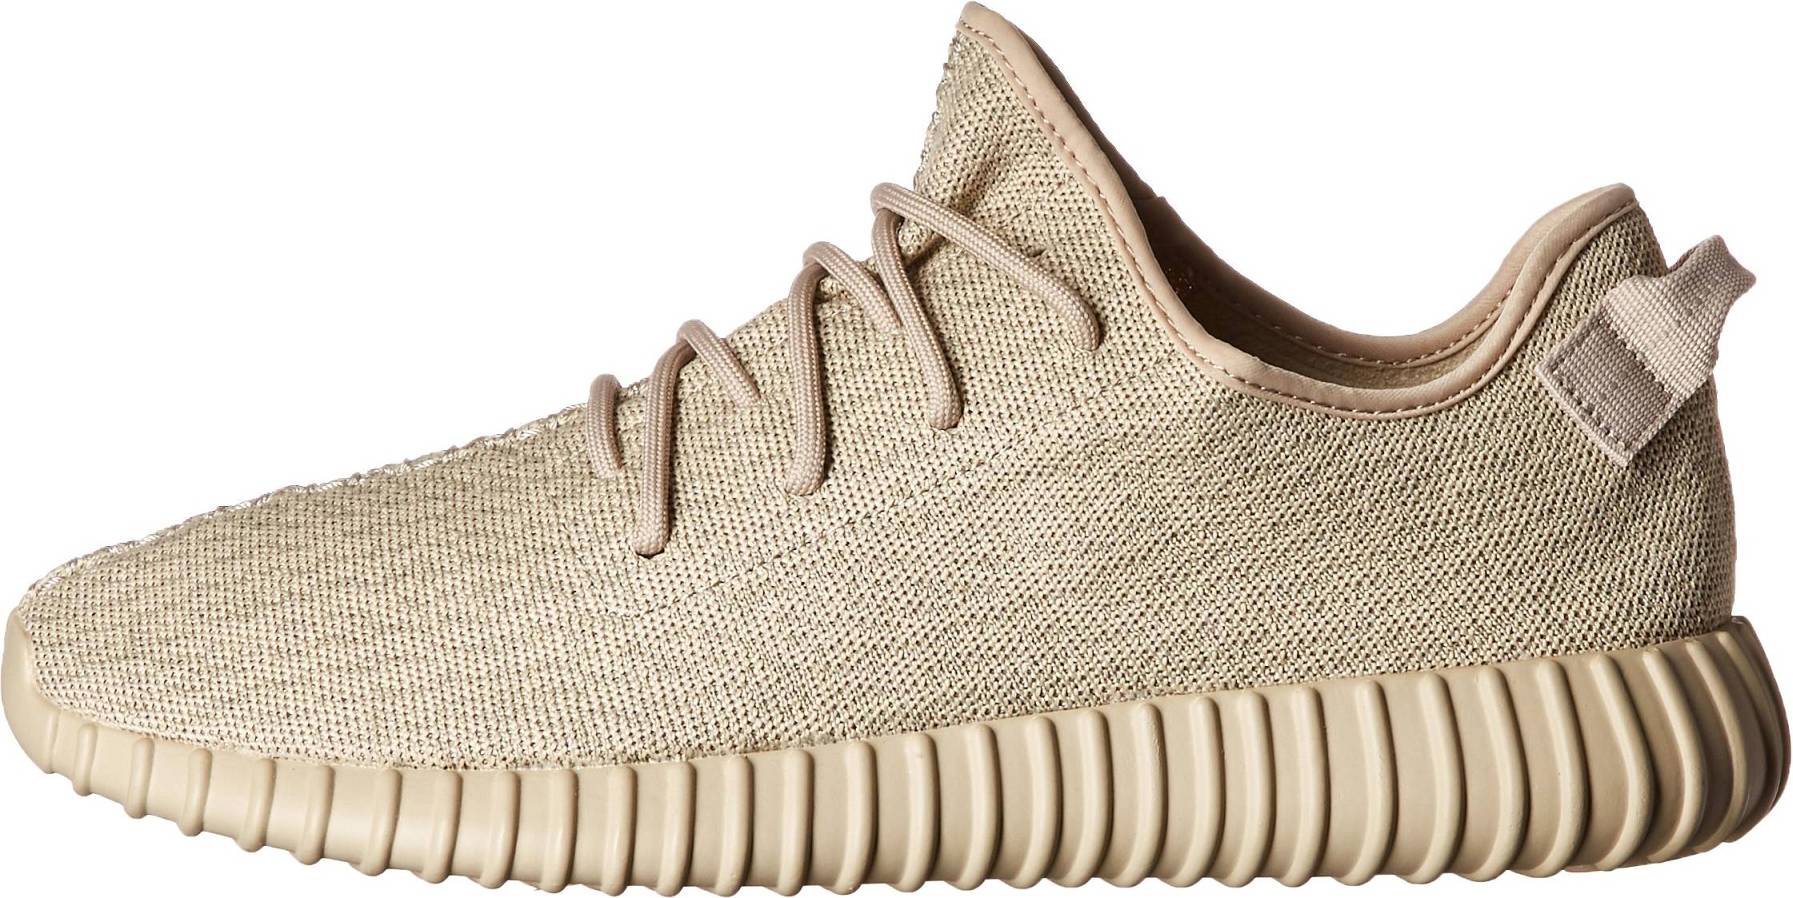 Adidas Yeezy 350 Boost Shoes Reviews & Reasons To Buy